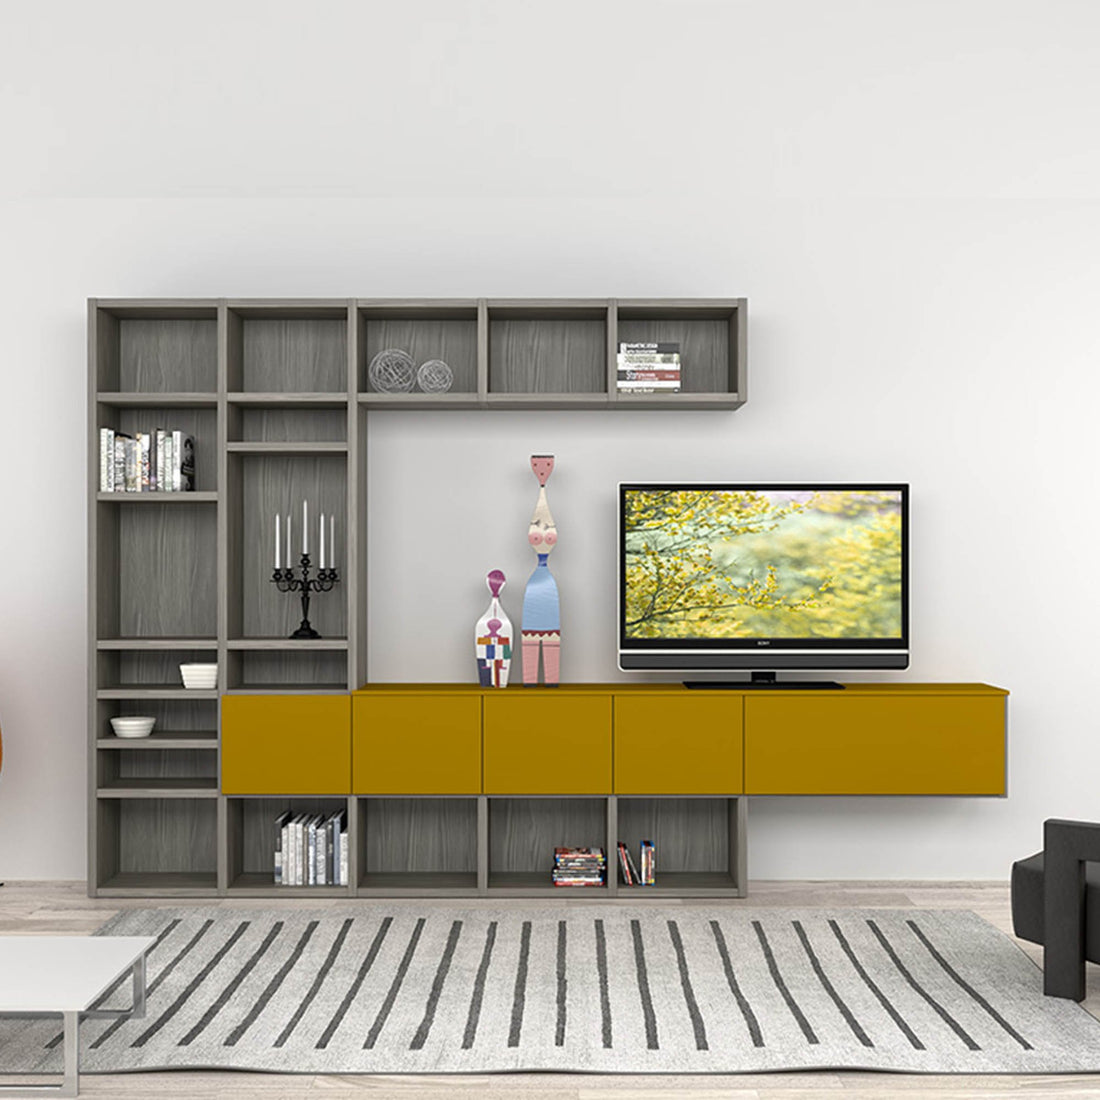 Our Innovative Furniture Designs with Multiple Uses for Small Spaces